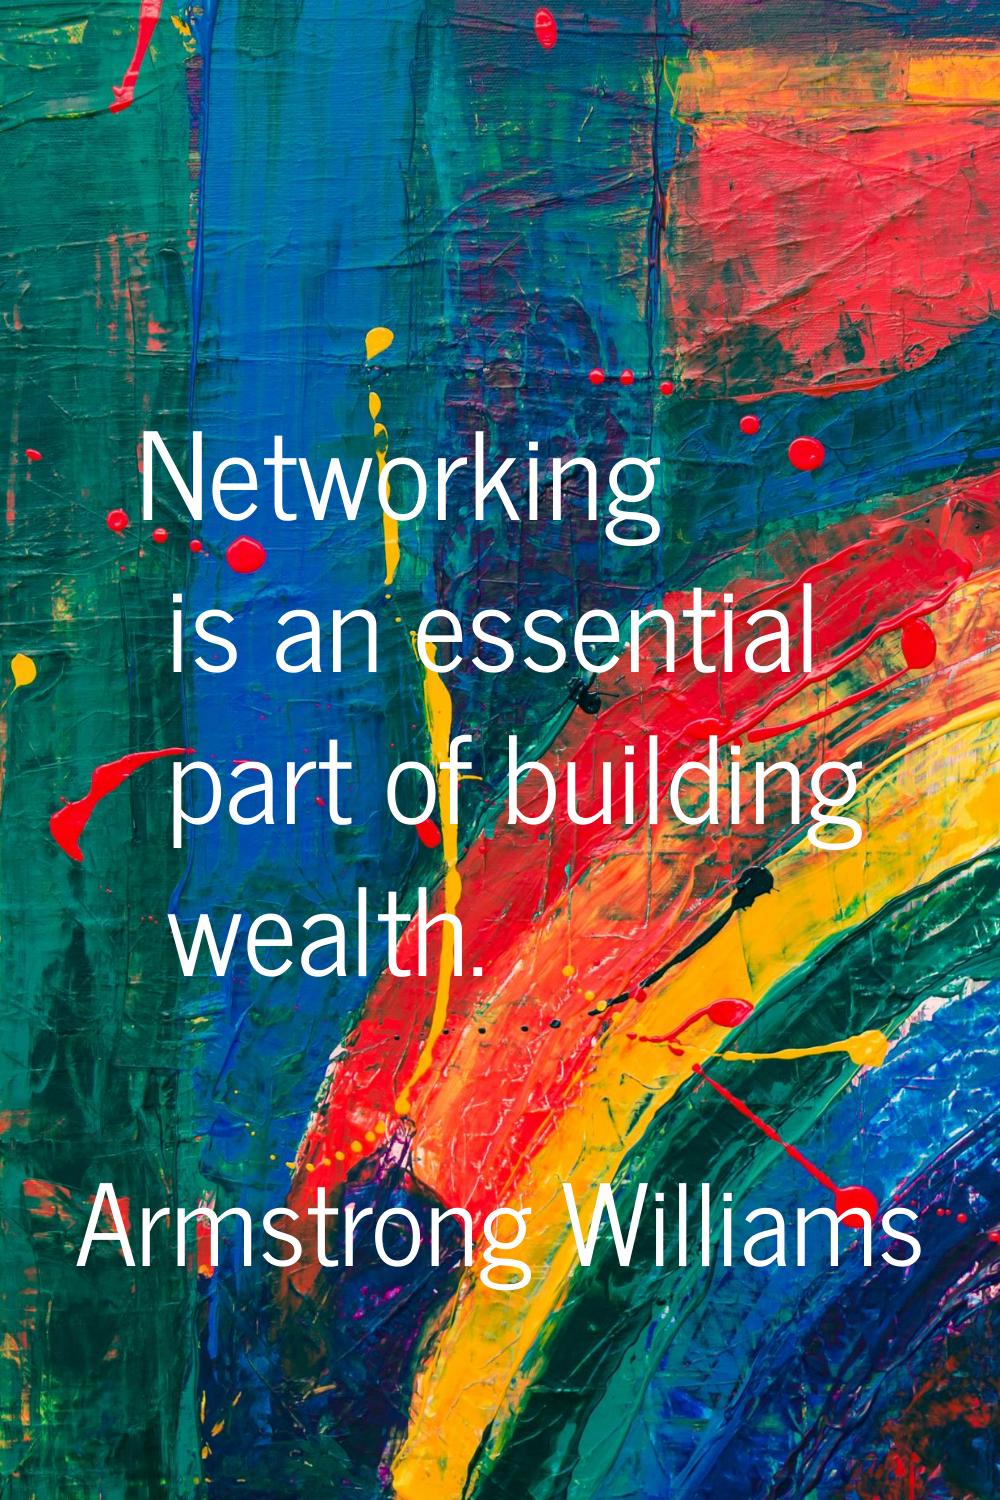 Networking is an essential part of building wealth.